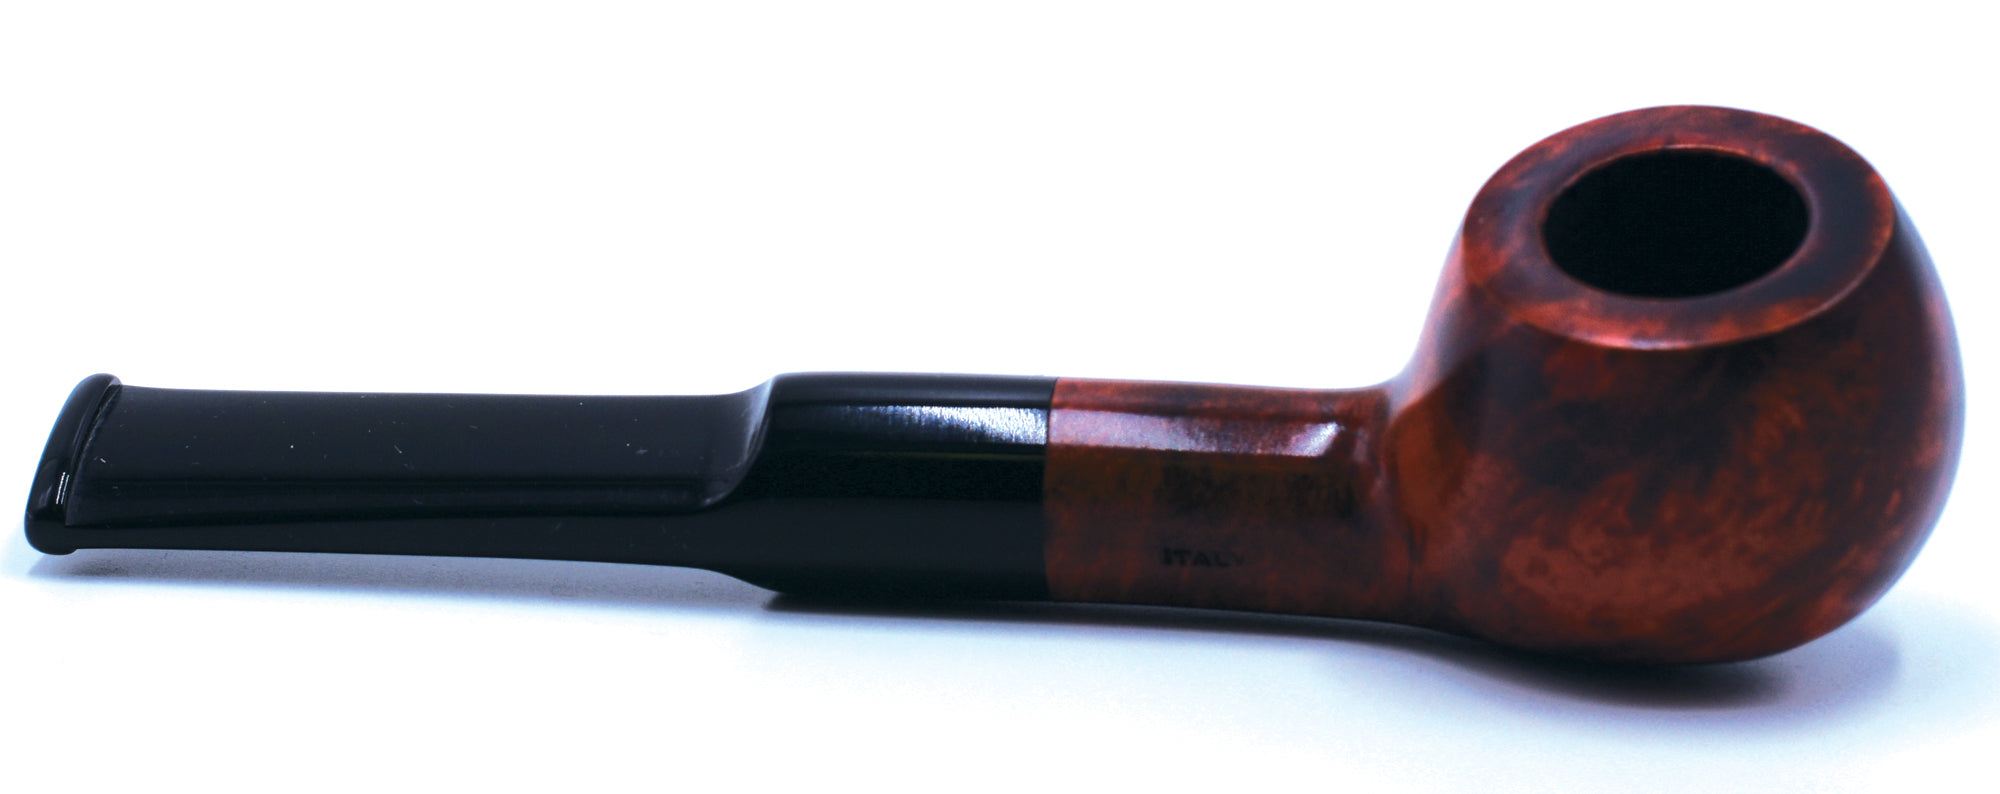 LEGENDEX® SCALADI* 9 MM Filtered Briar Smoking Pipe Made In Italy 01-08-153